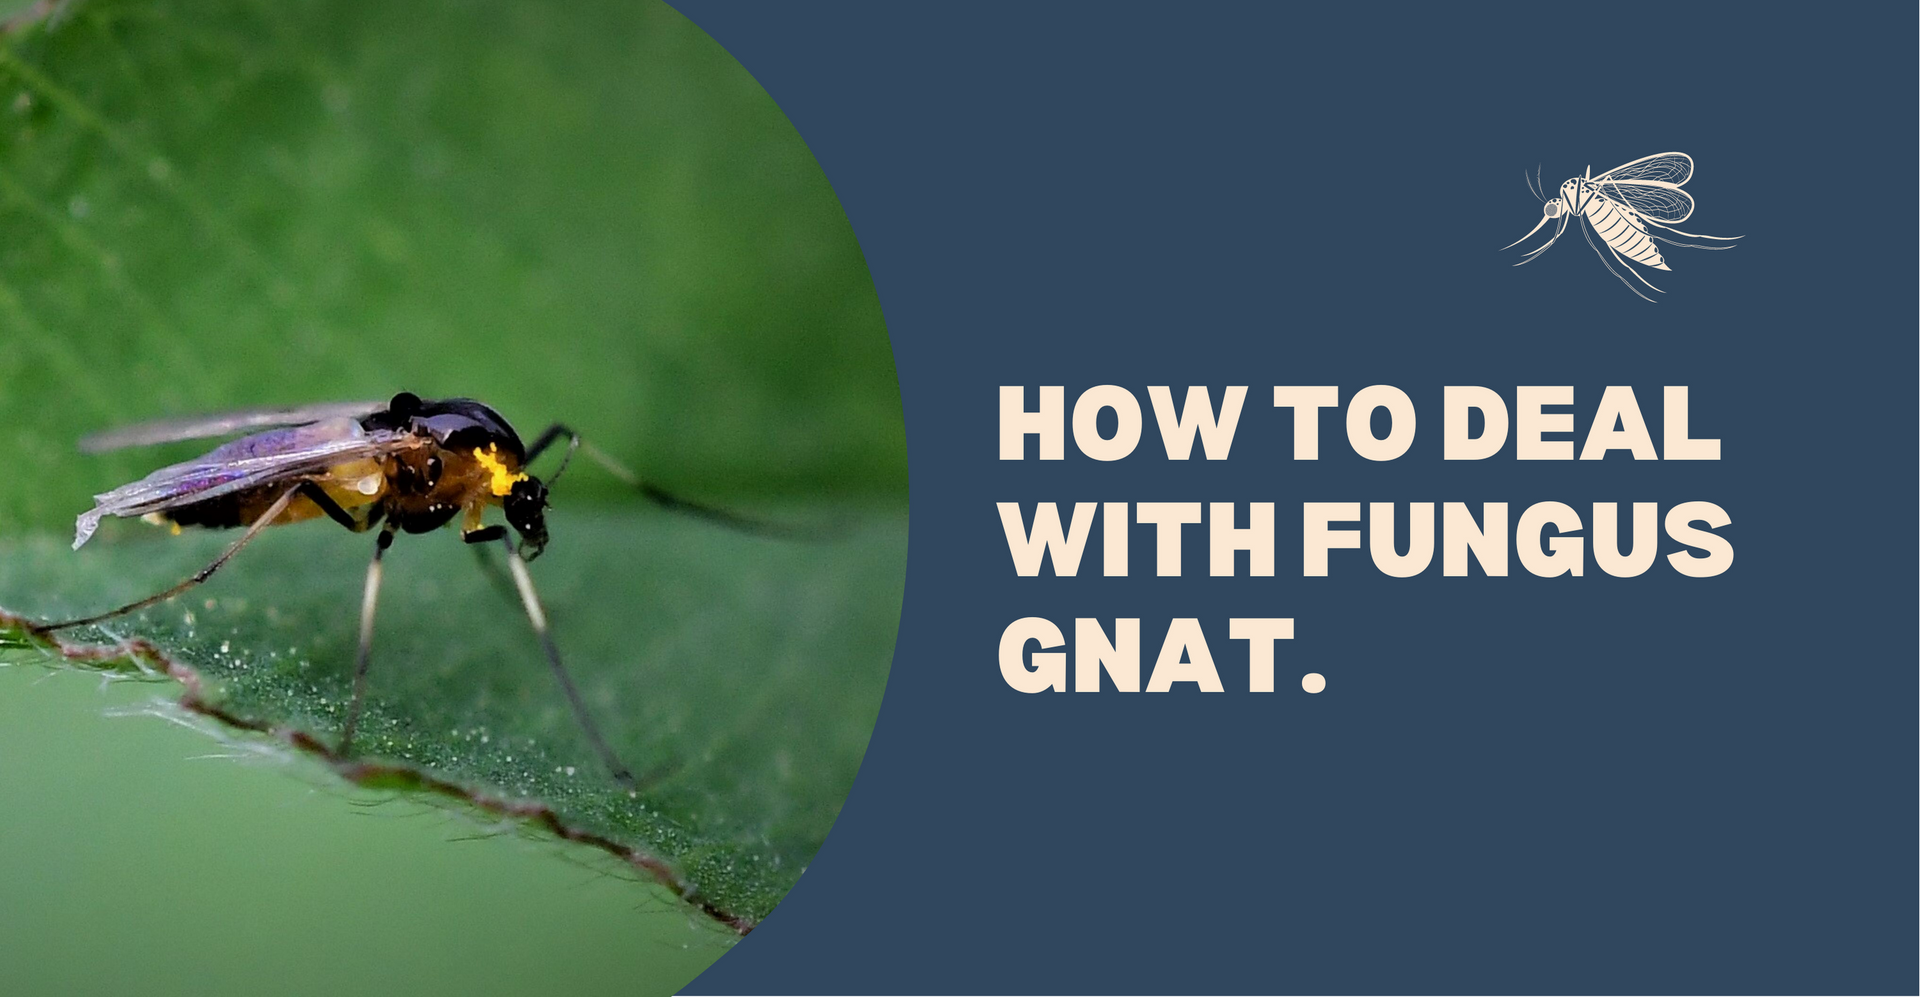 How to deal with Fungus Gnat